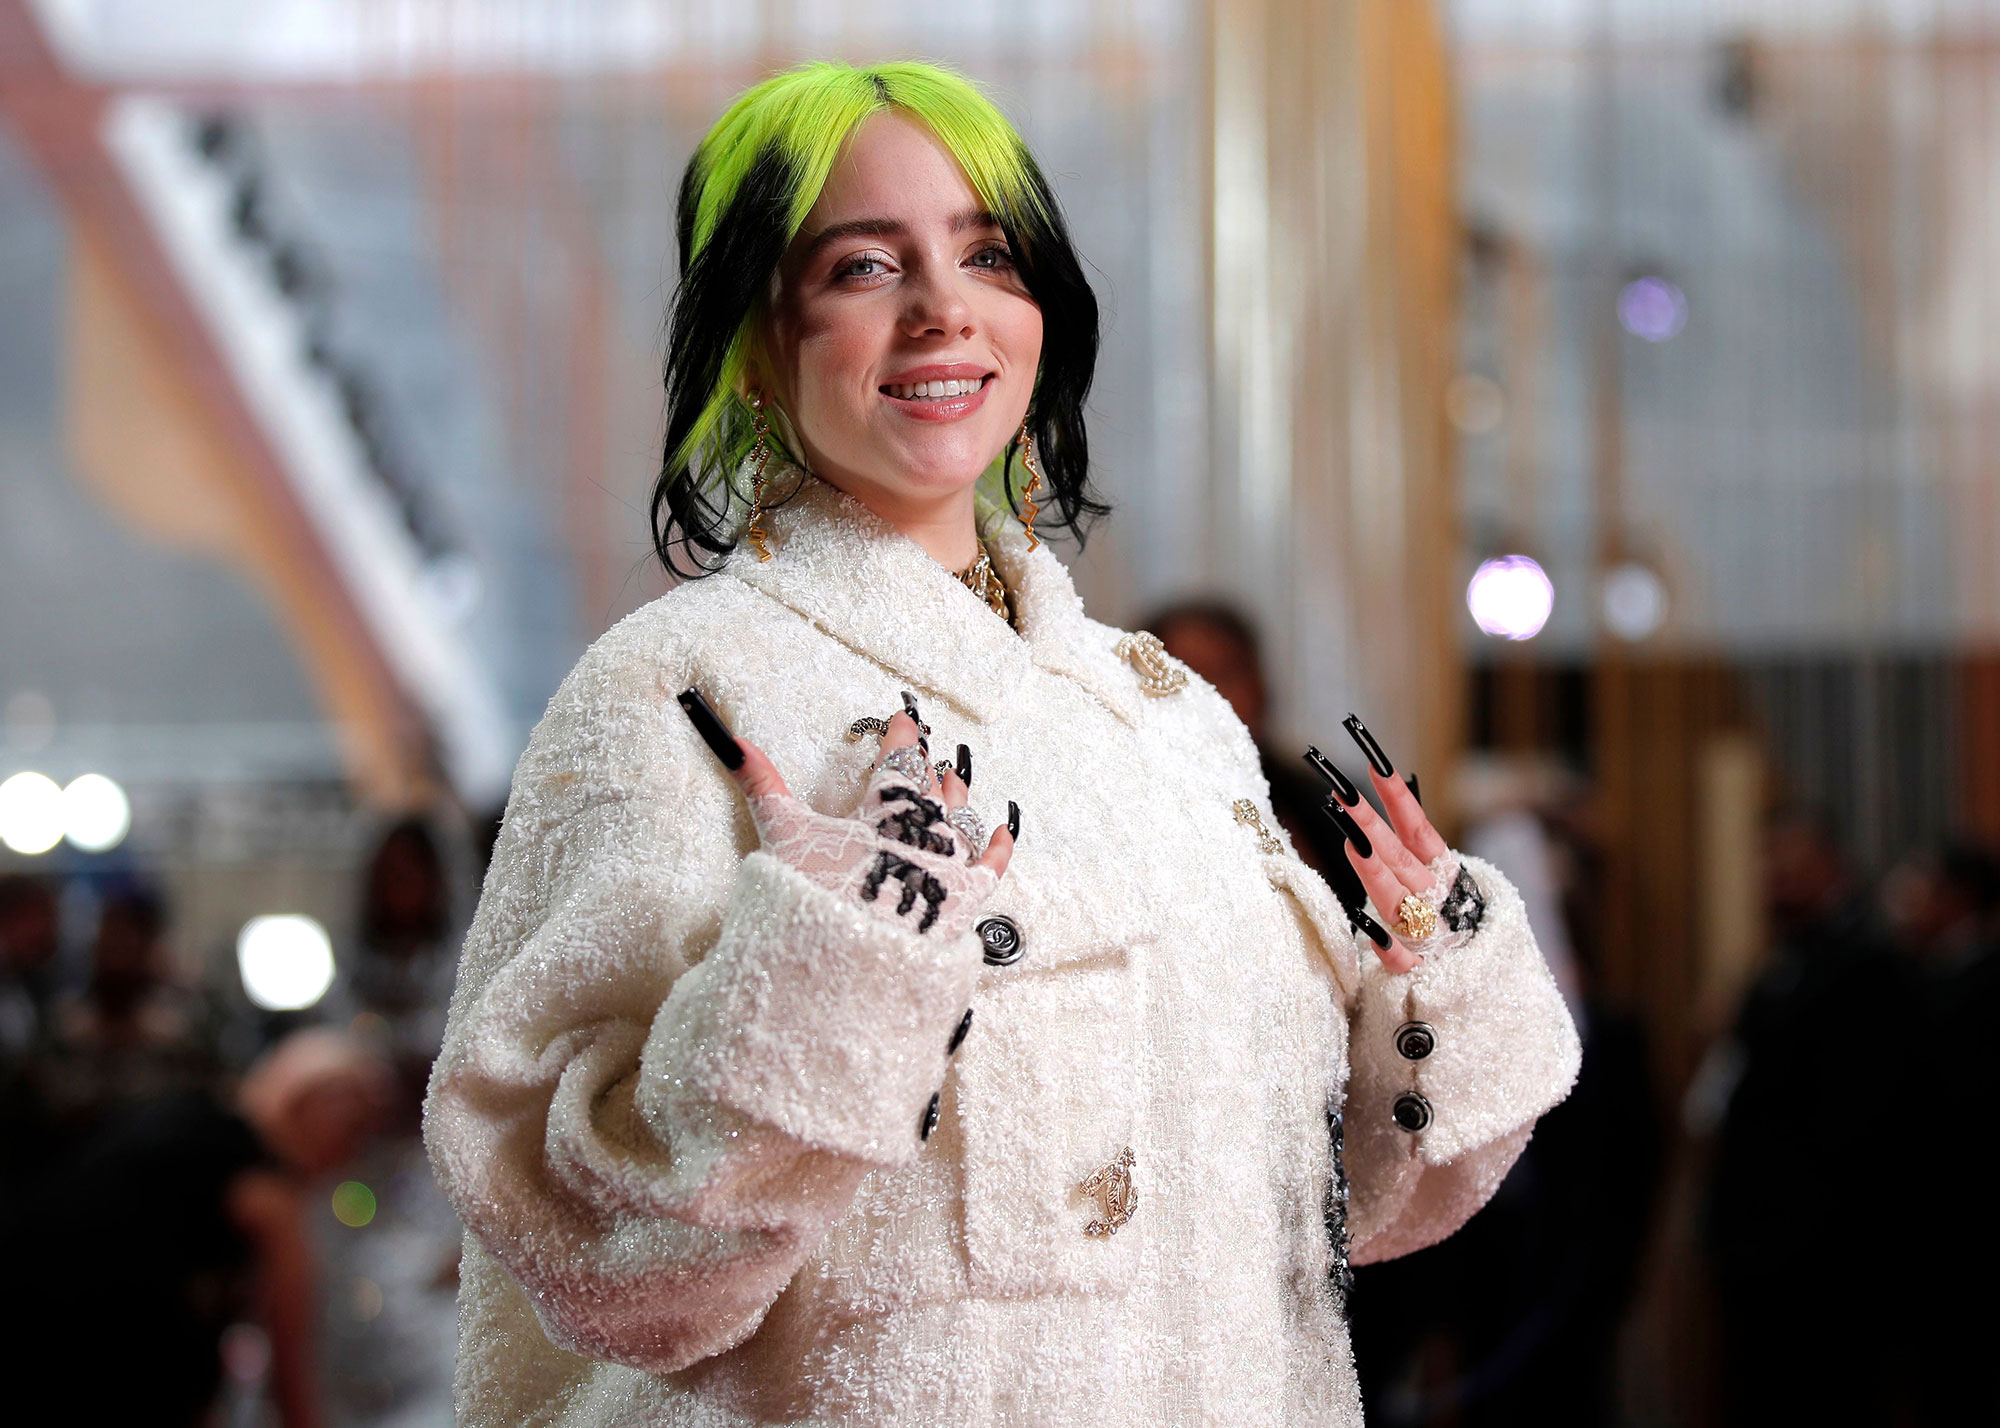 Billie Eilish Is Keeping Her Sexuality to Herself, Thank You Very Much